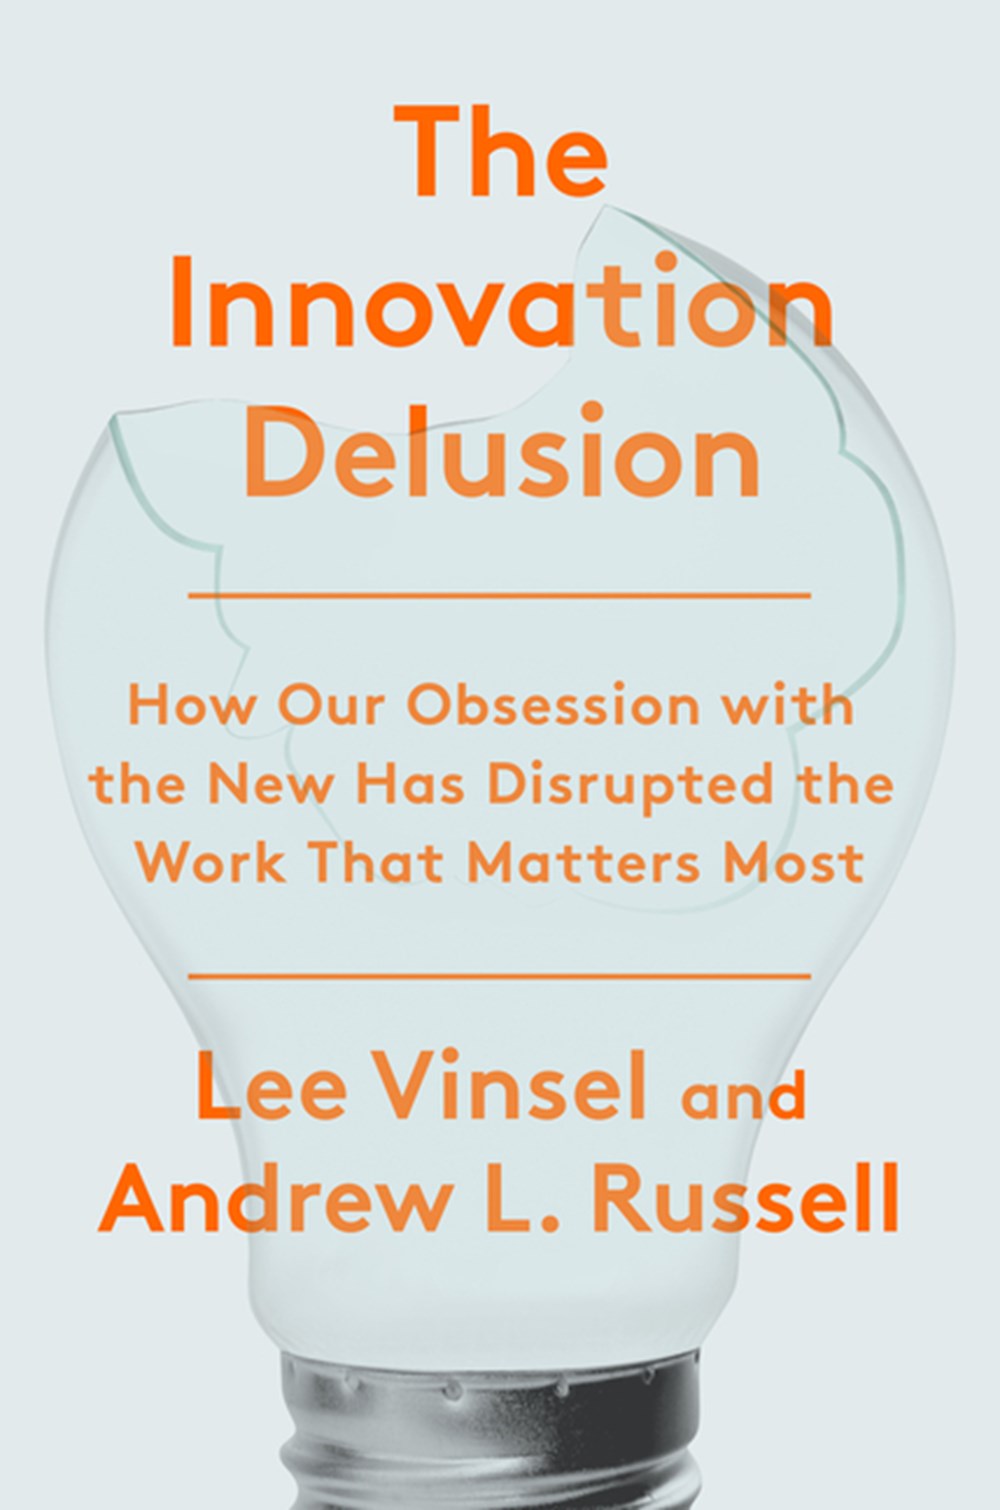 Innovation Delusion How Our Obsession with the New Has Disrupted the Work That Matters Most